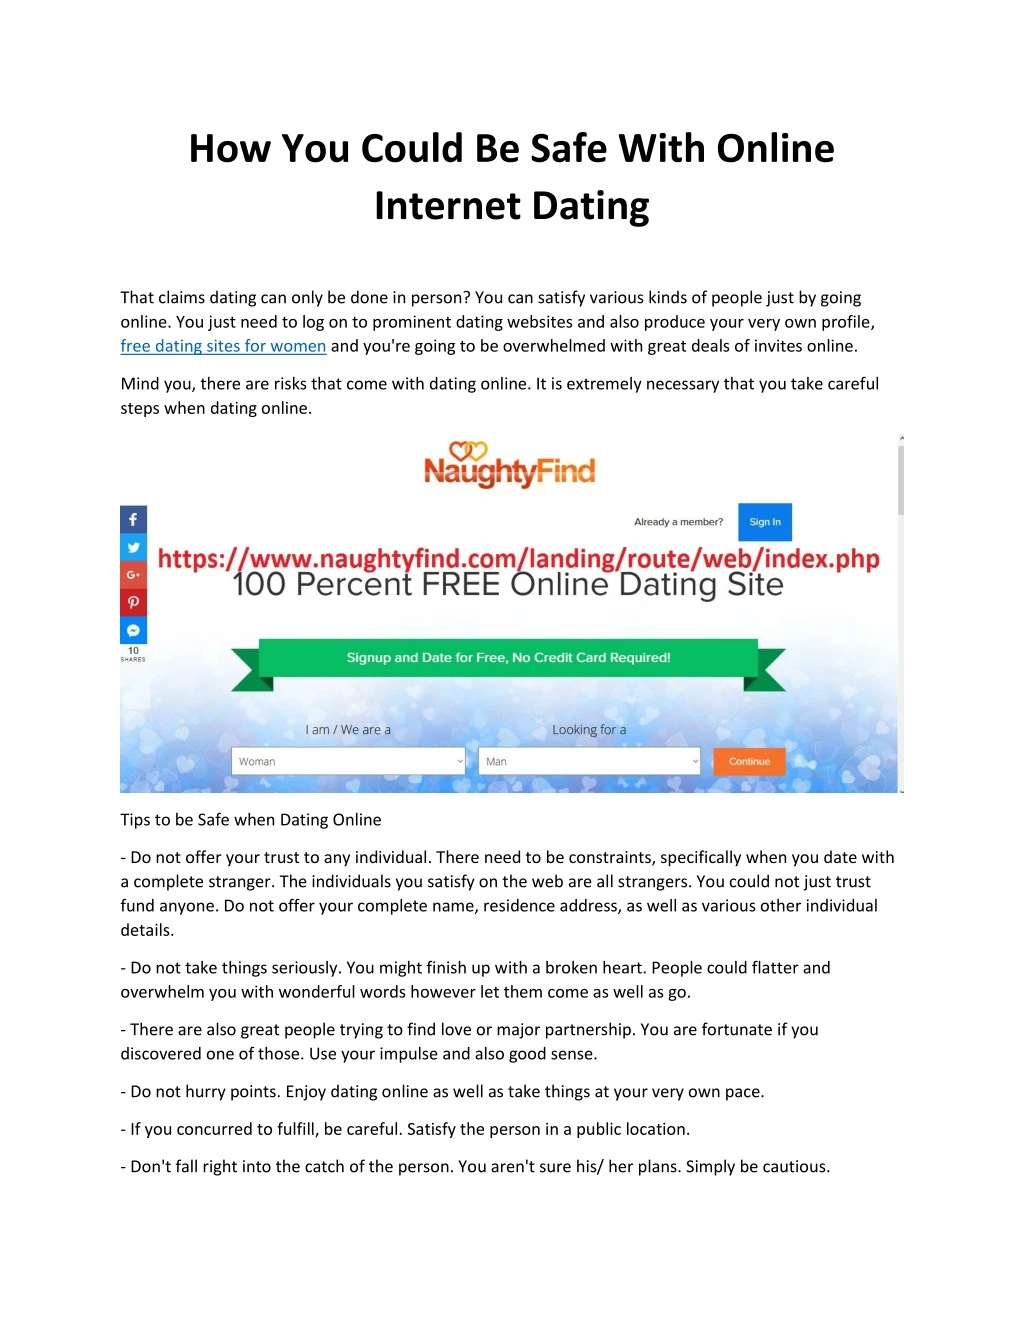 how you could be safe with online internet dating